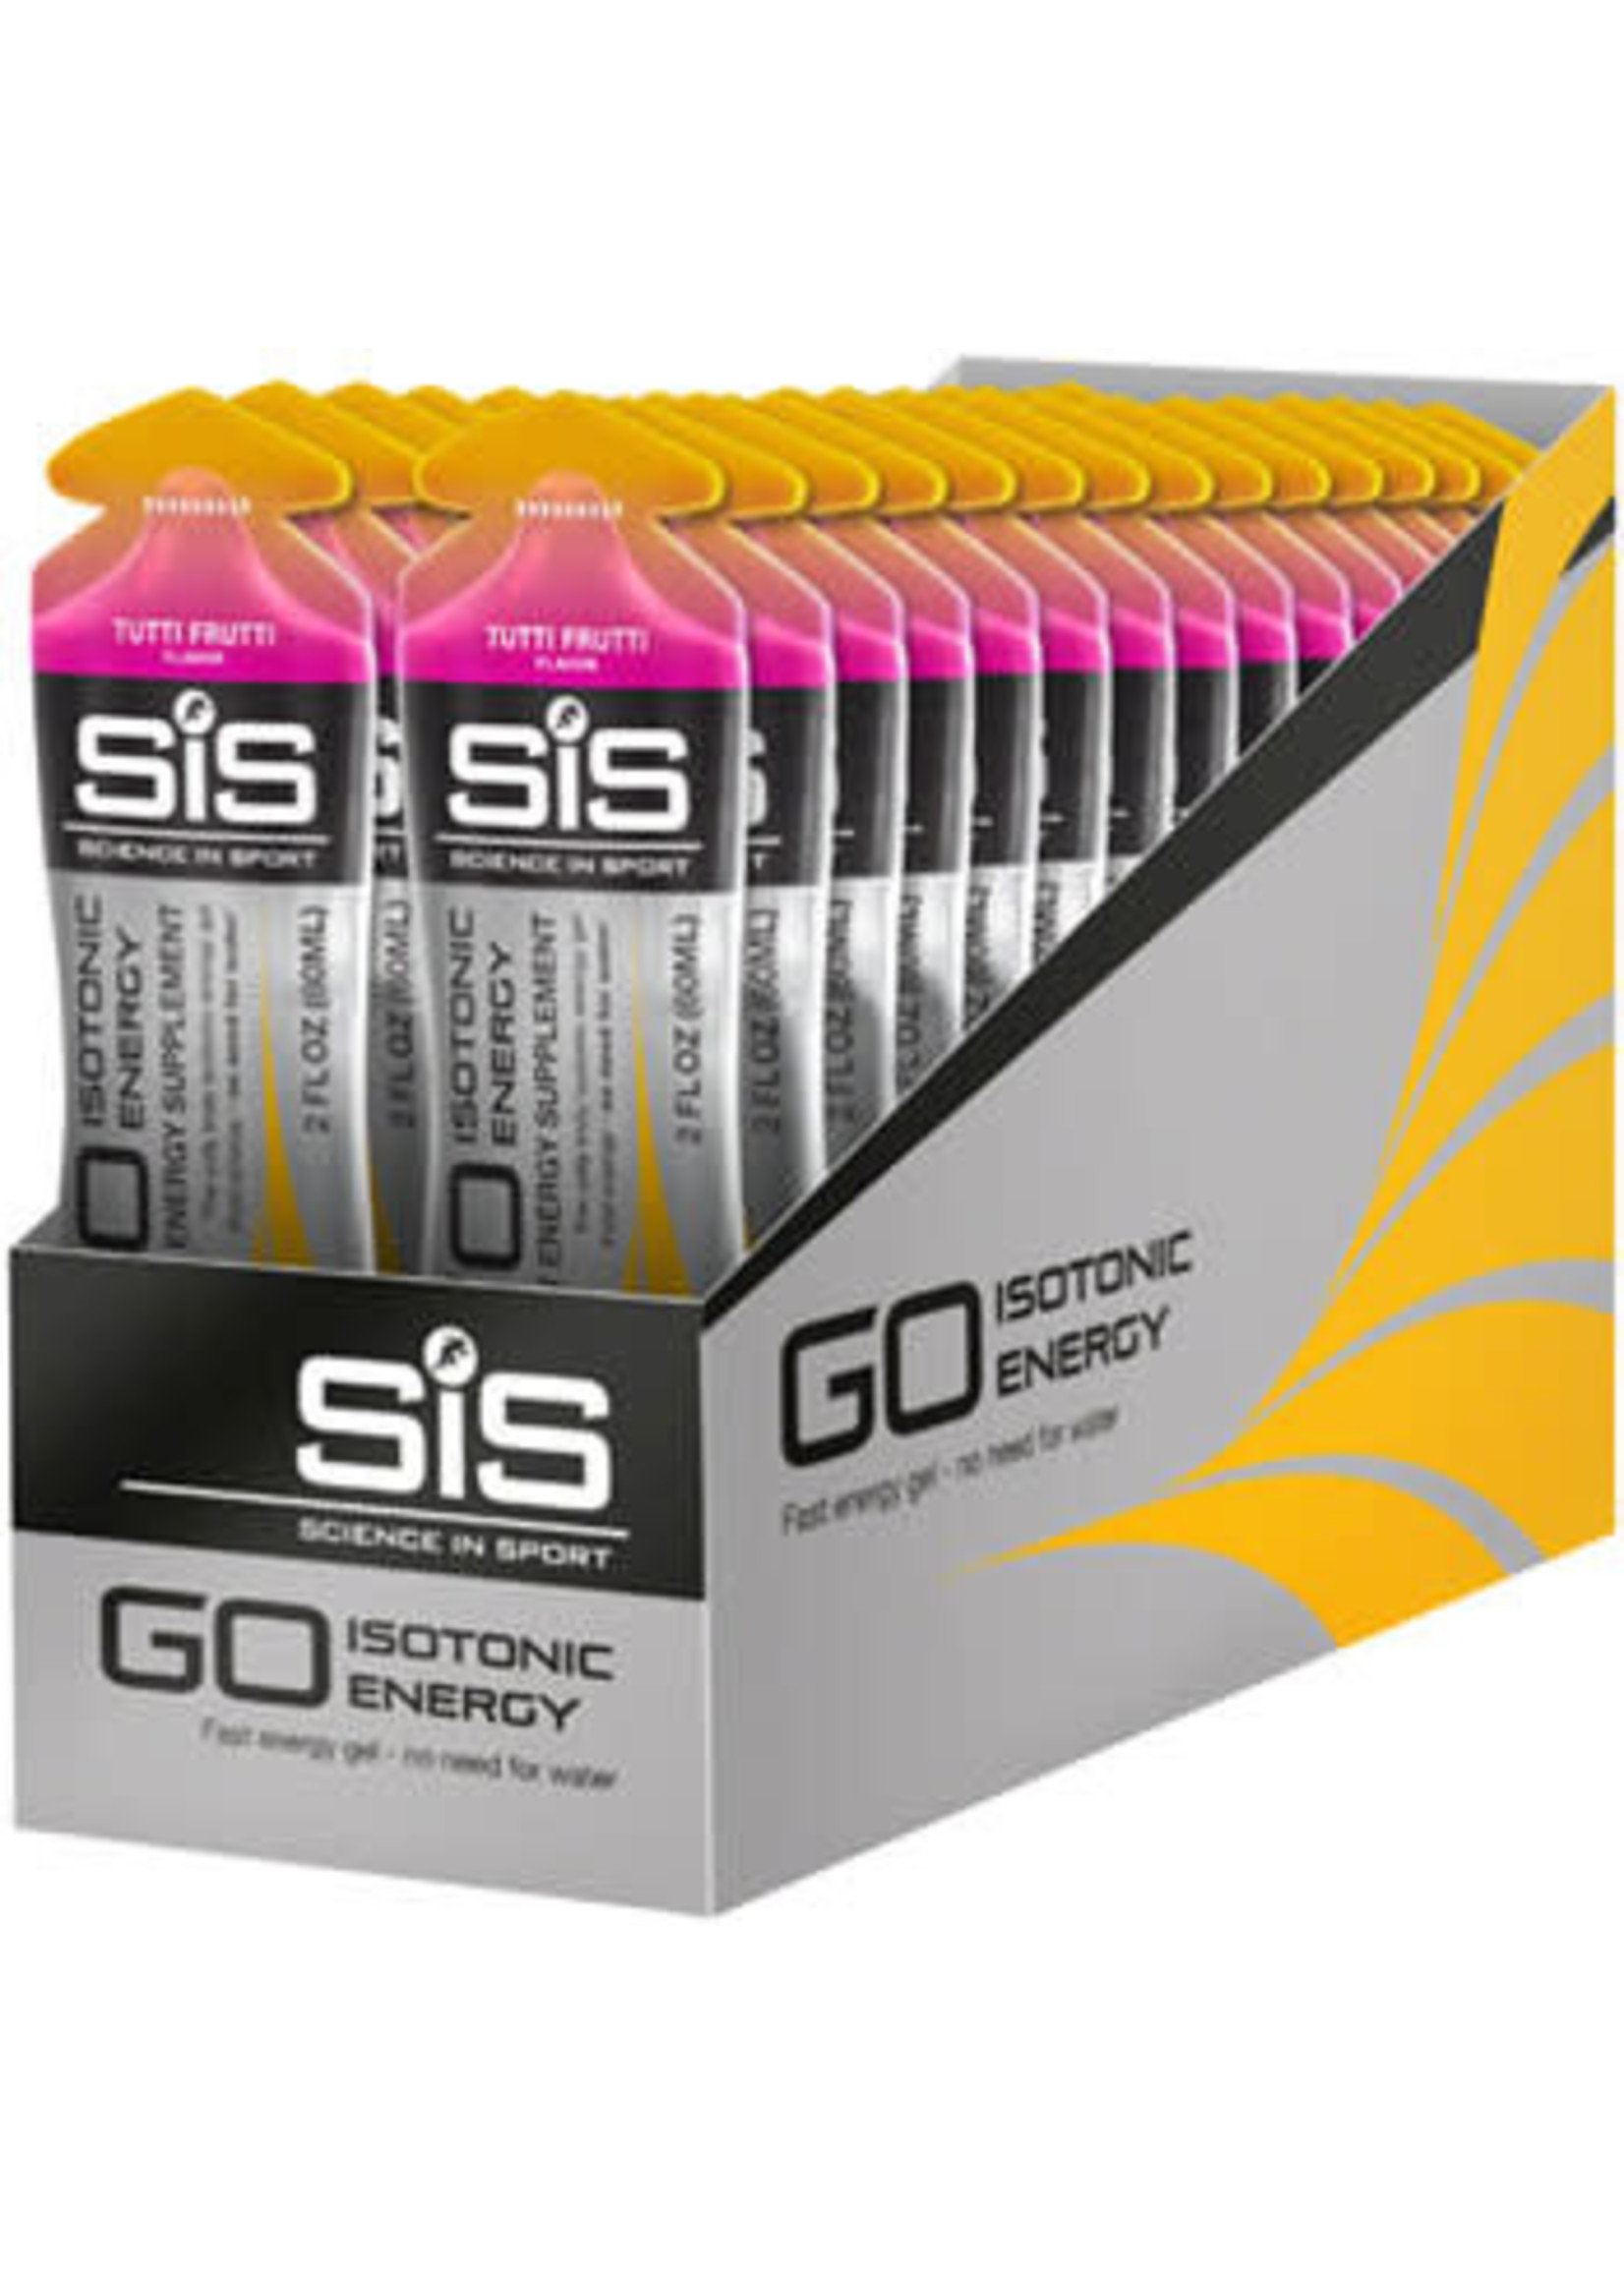 Science in Sport SIS GO Isotonic Energy Gel